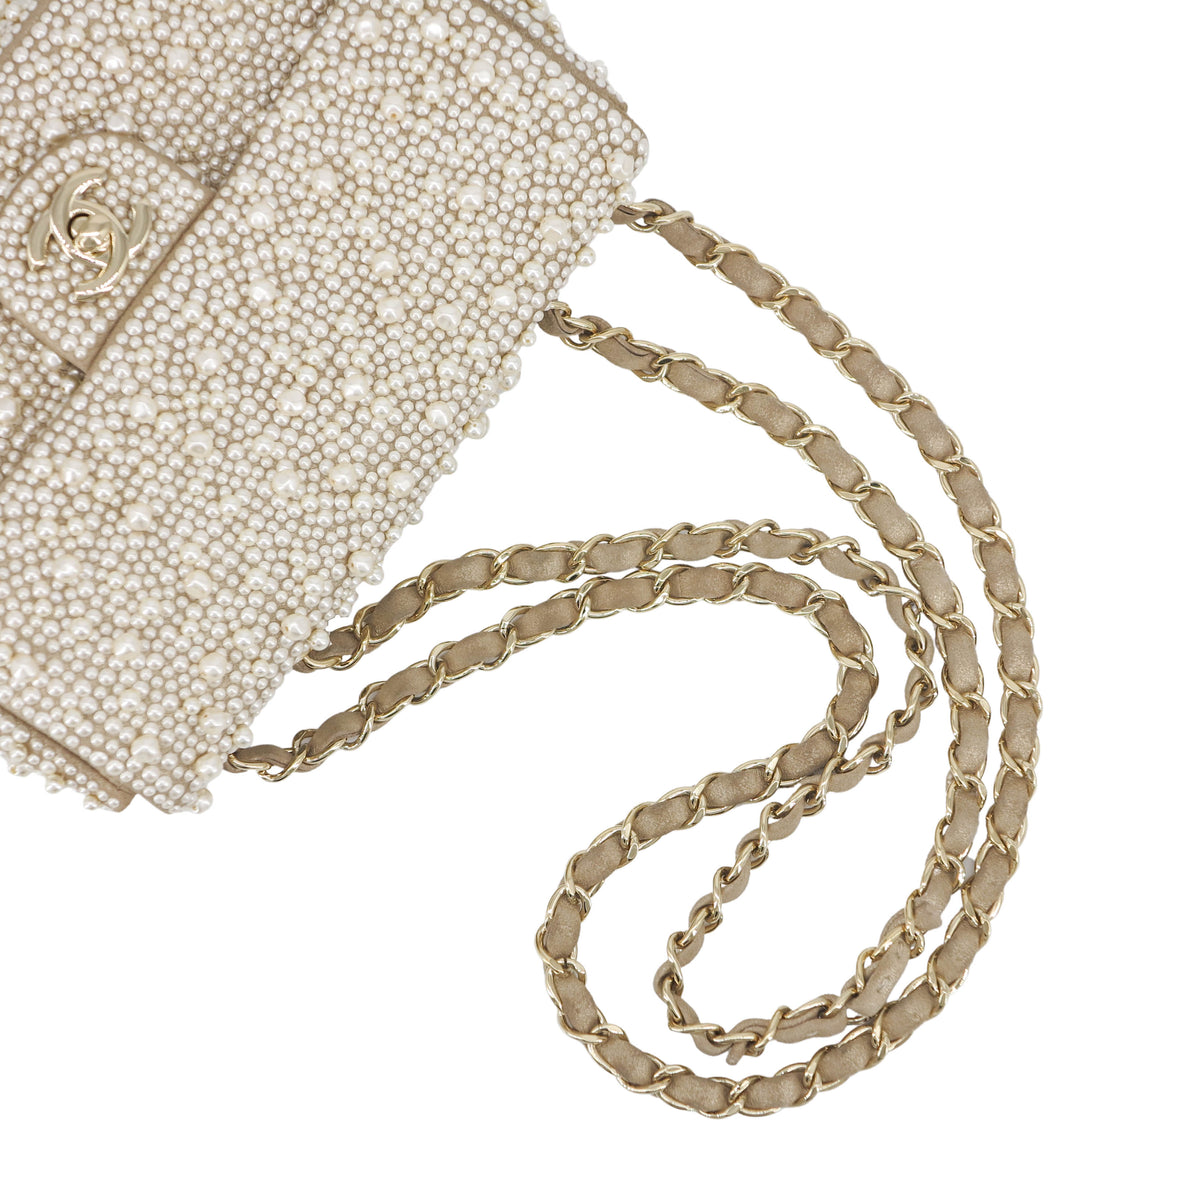 Shop 17A Ritz Pearl Mini Flap Bag CHANEL. Find the newest styles